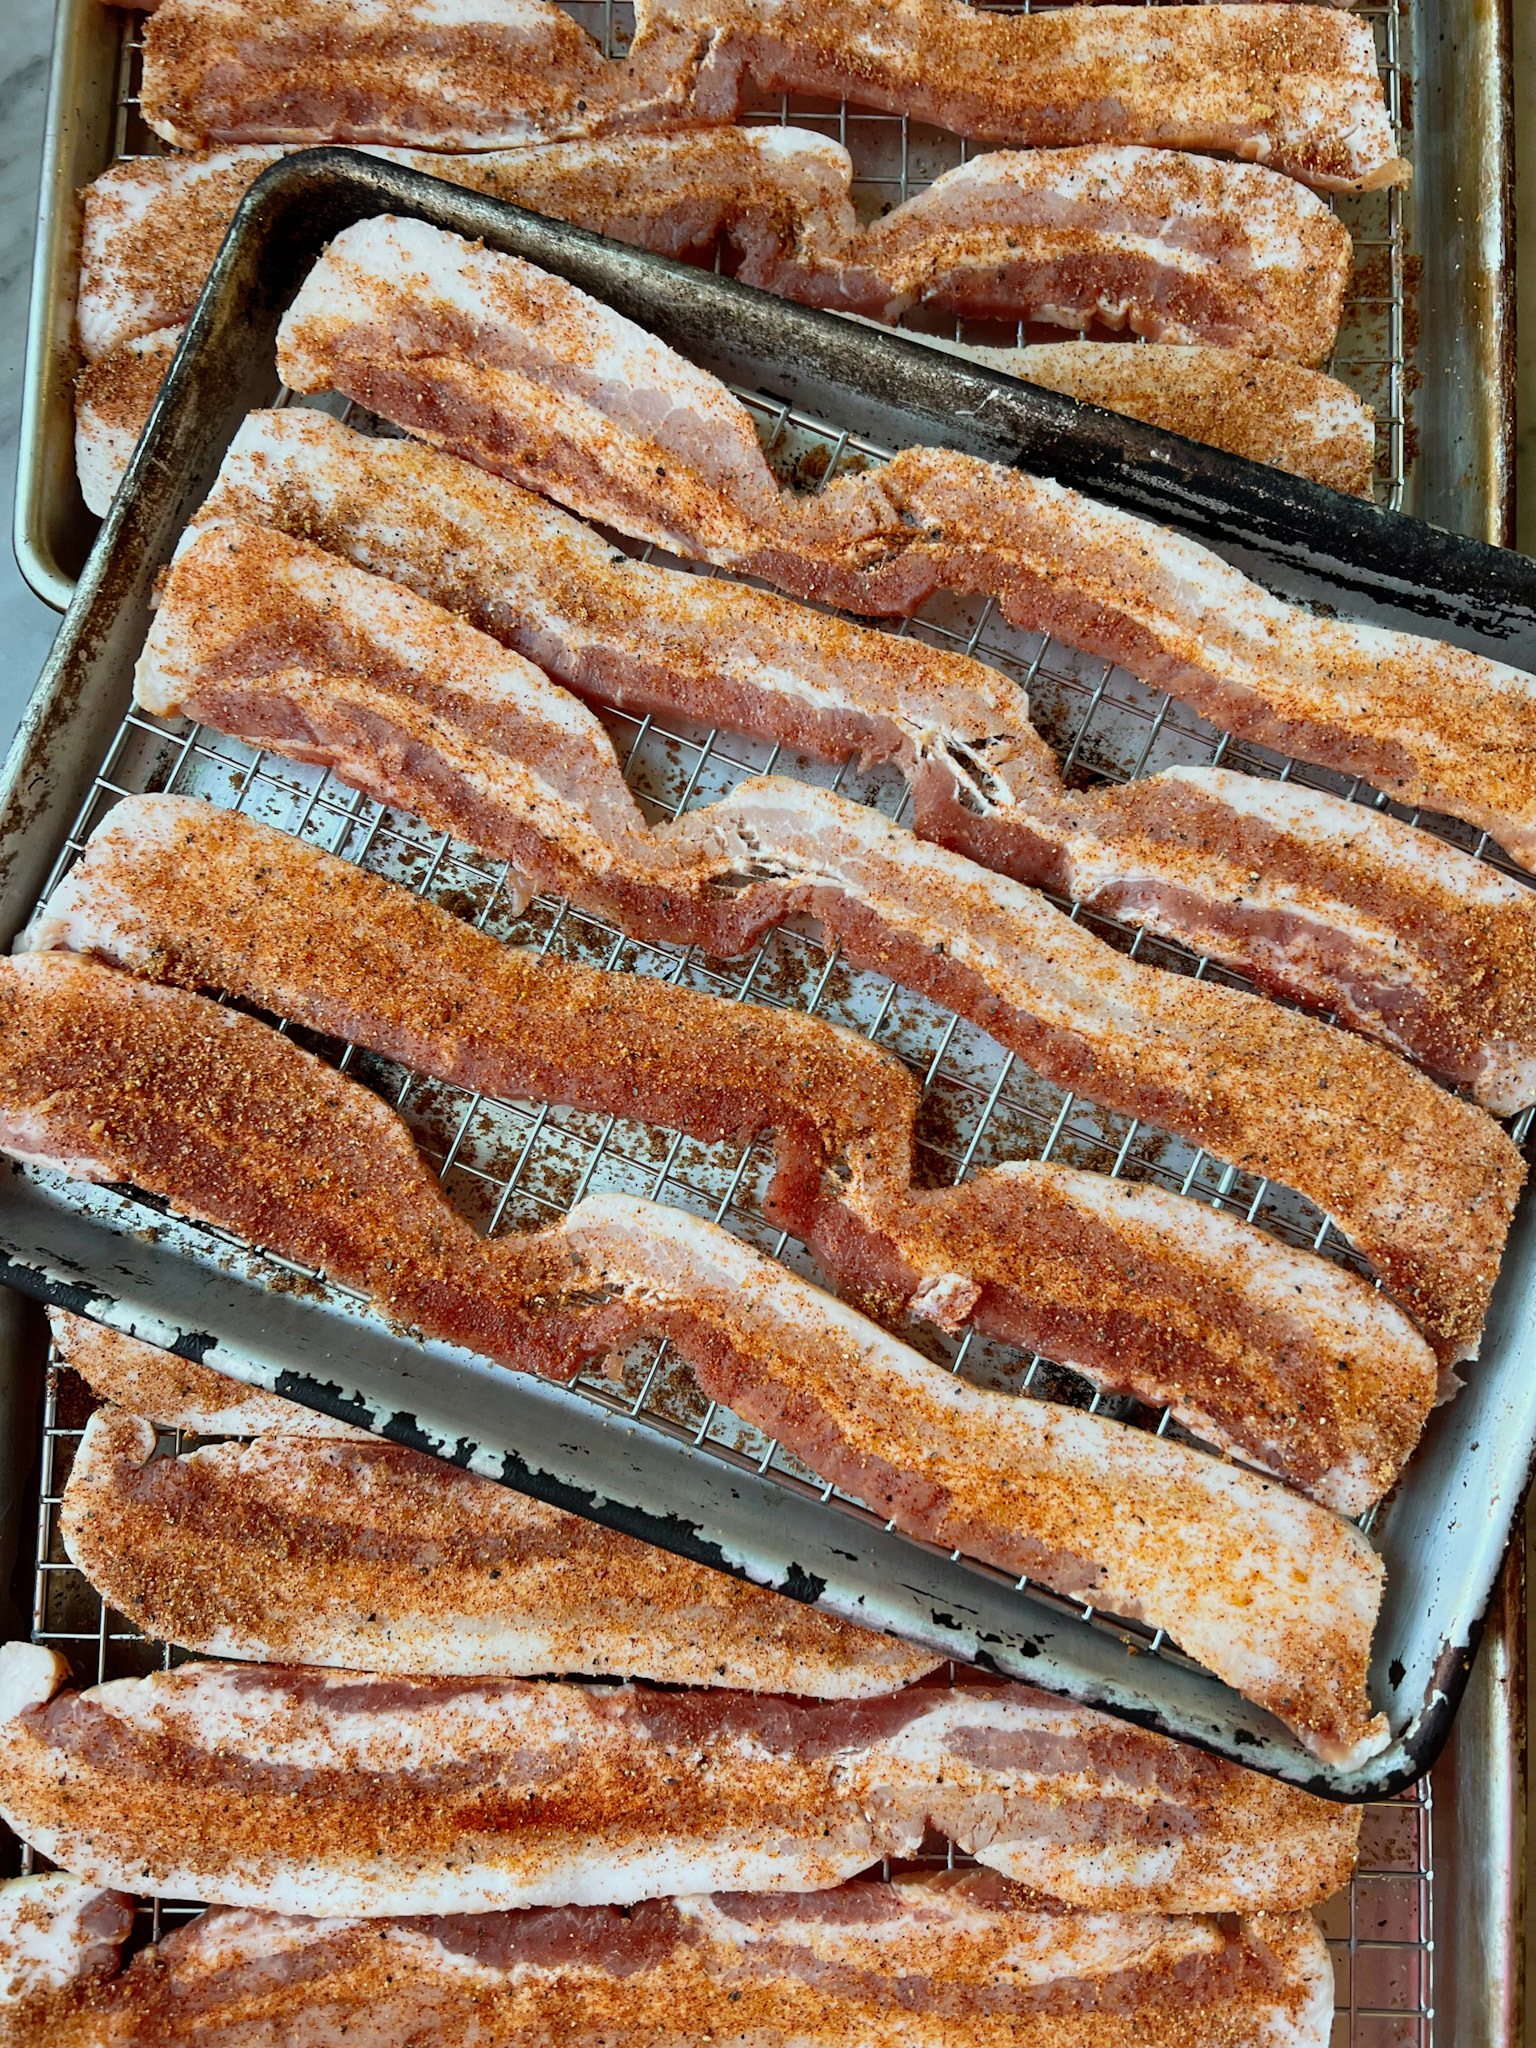 thick cut bacon in pans on smoking grates with seasoning